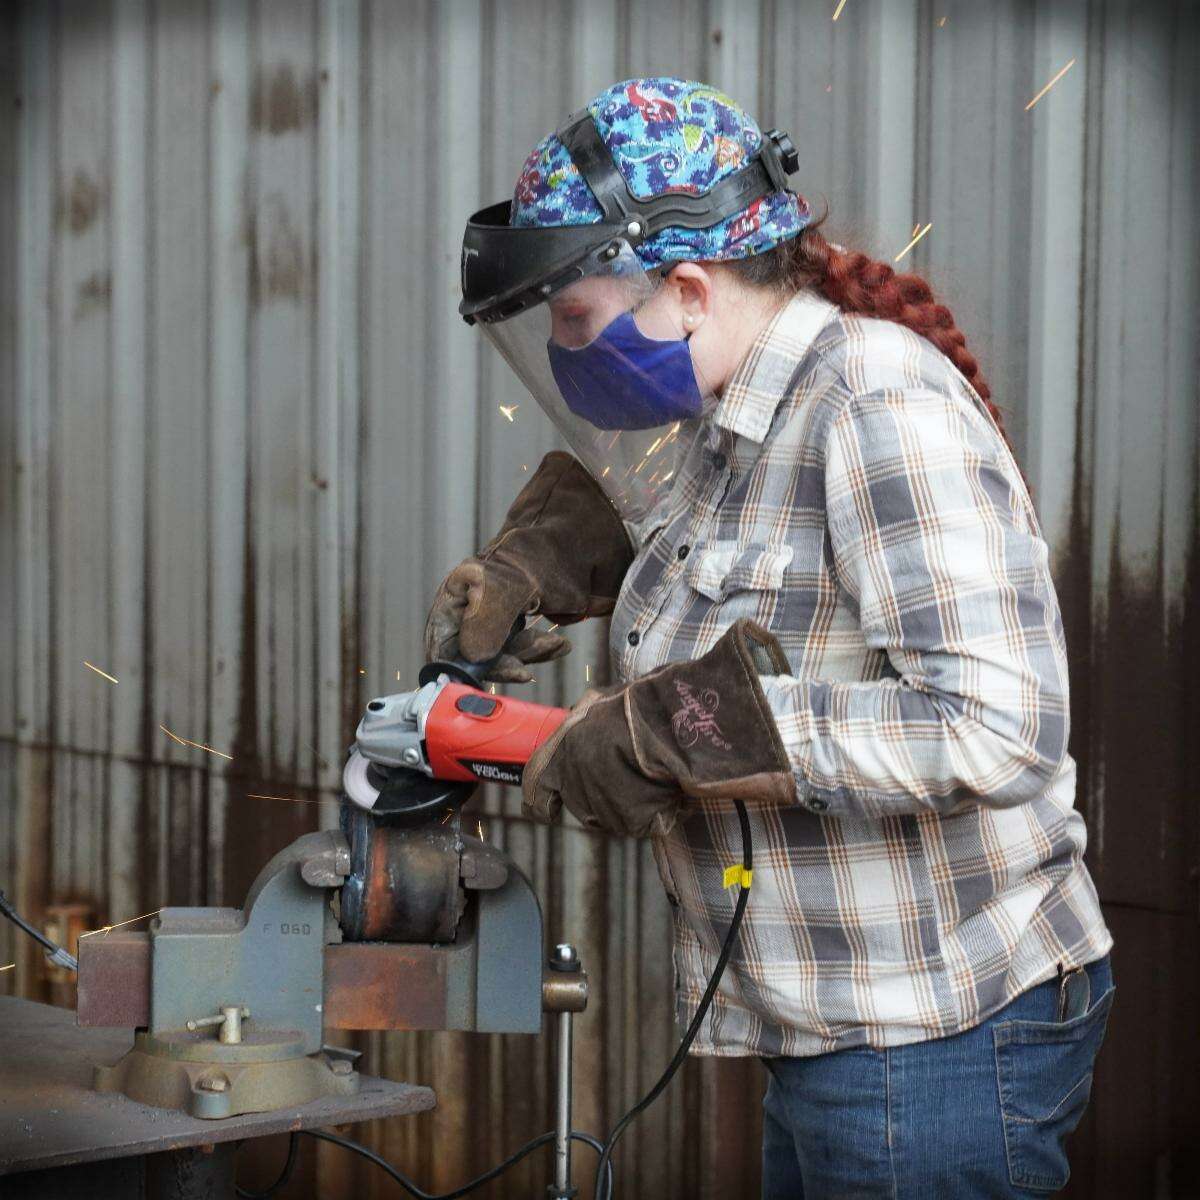 Pictured is Mariah Colbert, first year welding student at LIT